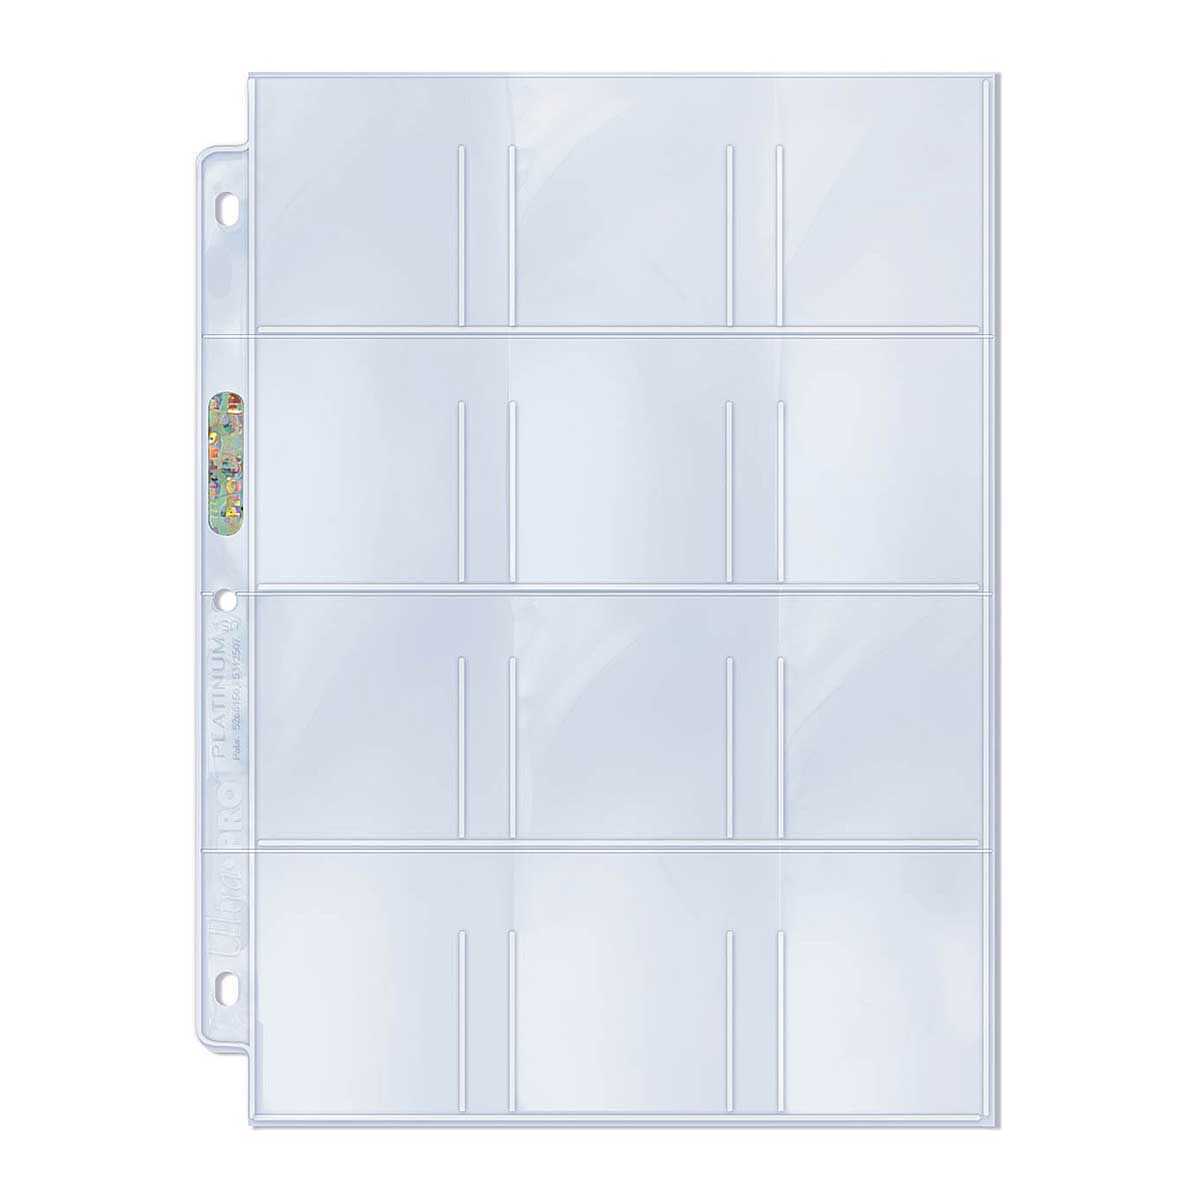 Ultra Pro 'Up - 12-Pocket Platinum Page With 2-1/4 X 2-1/2 Pockets', Blank/Blank